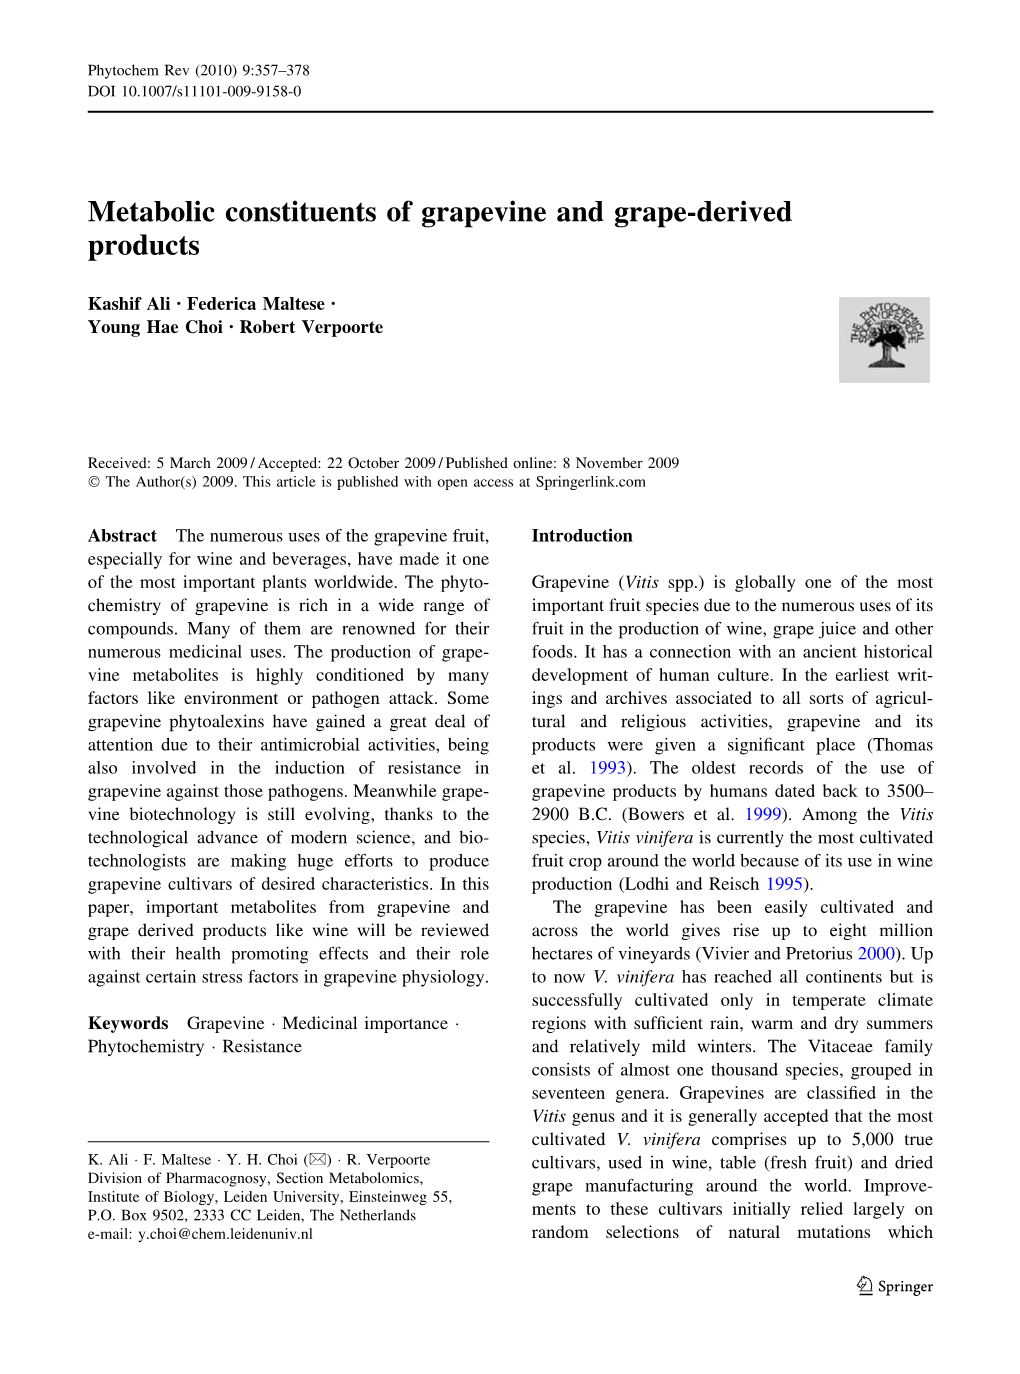 Metabolic Constituents of Grapevine and Grape-Derived Products